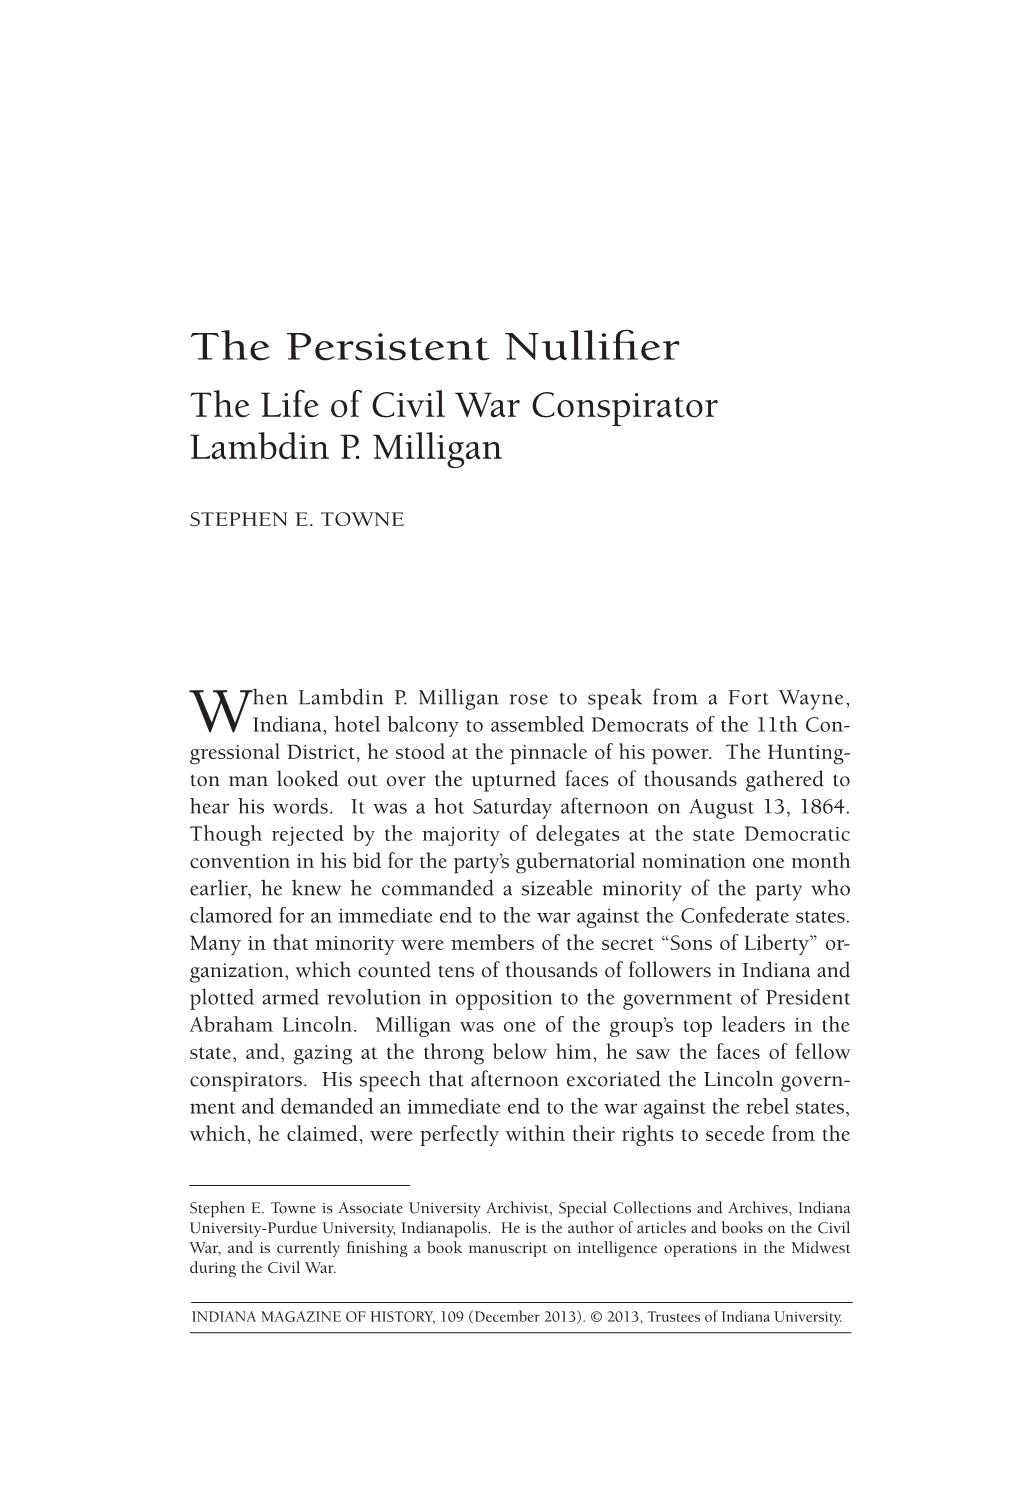 The Persistent Nullifier 305